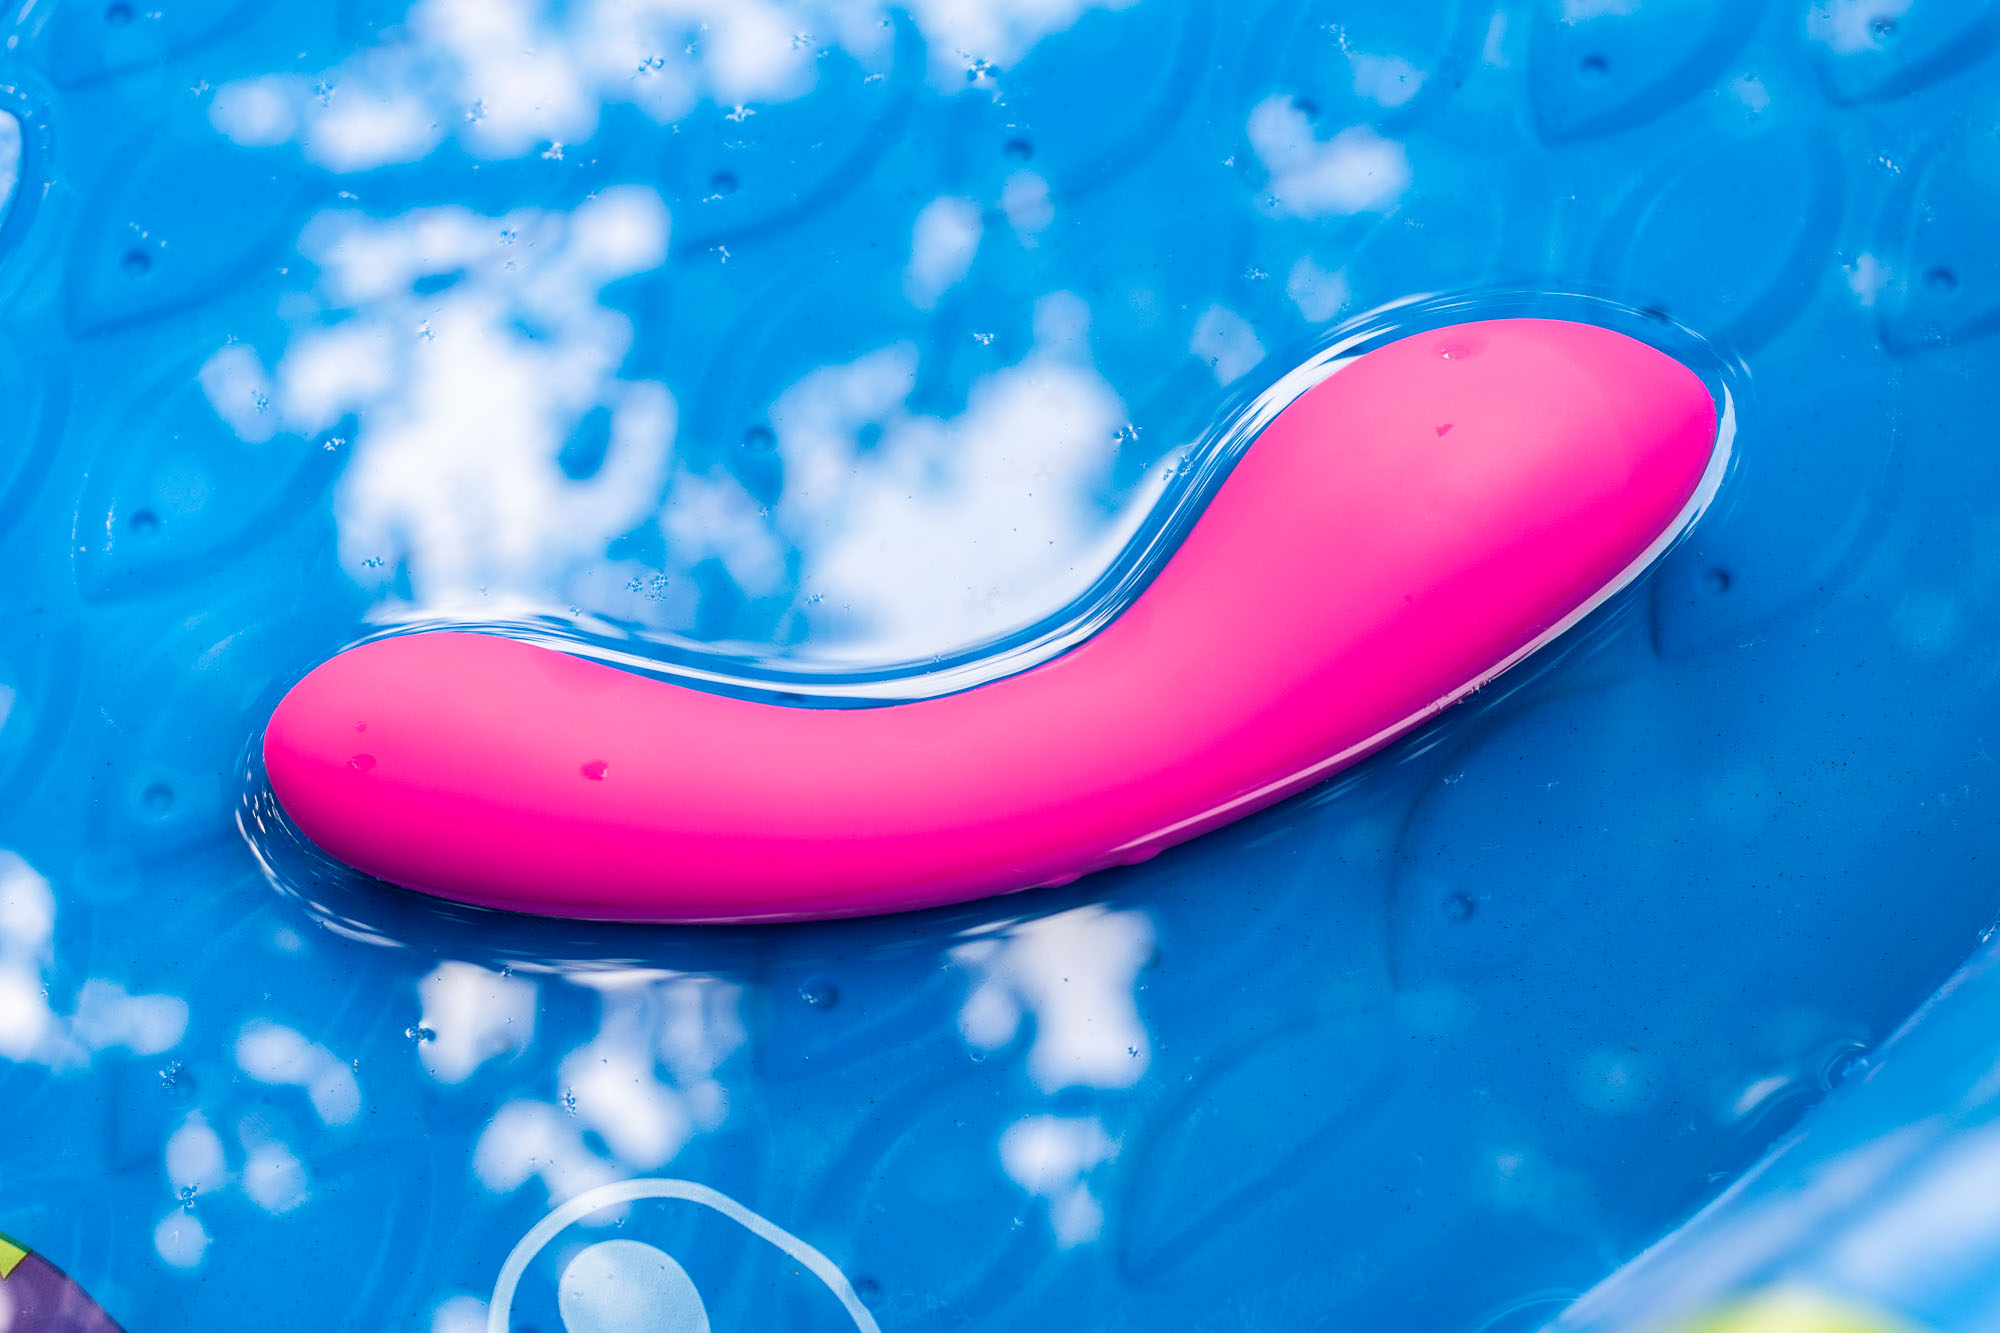 BMS Factory Swan Wand vibrator and its reflection, in shallow water in a kiddie pool.